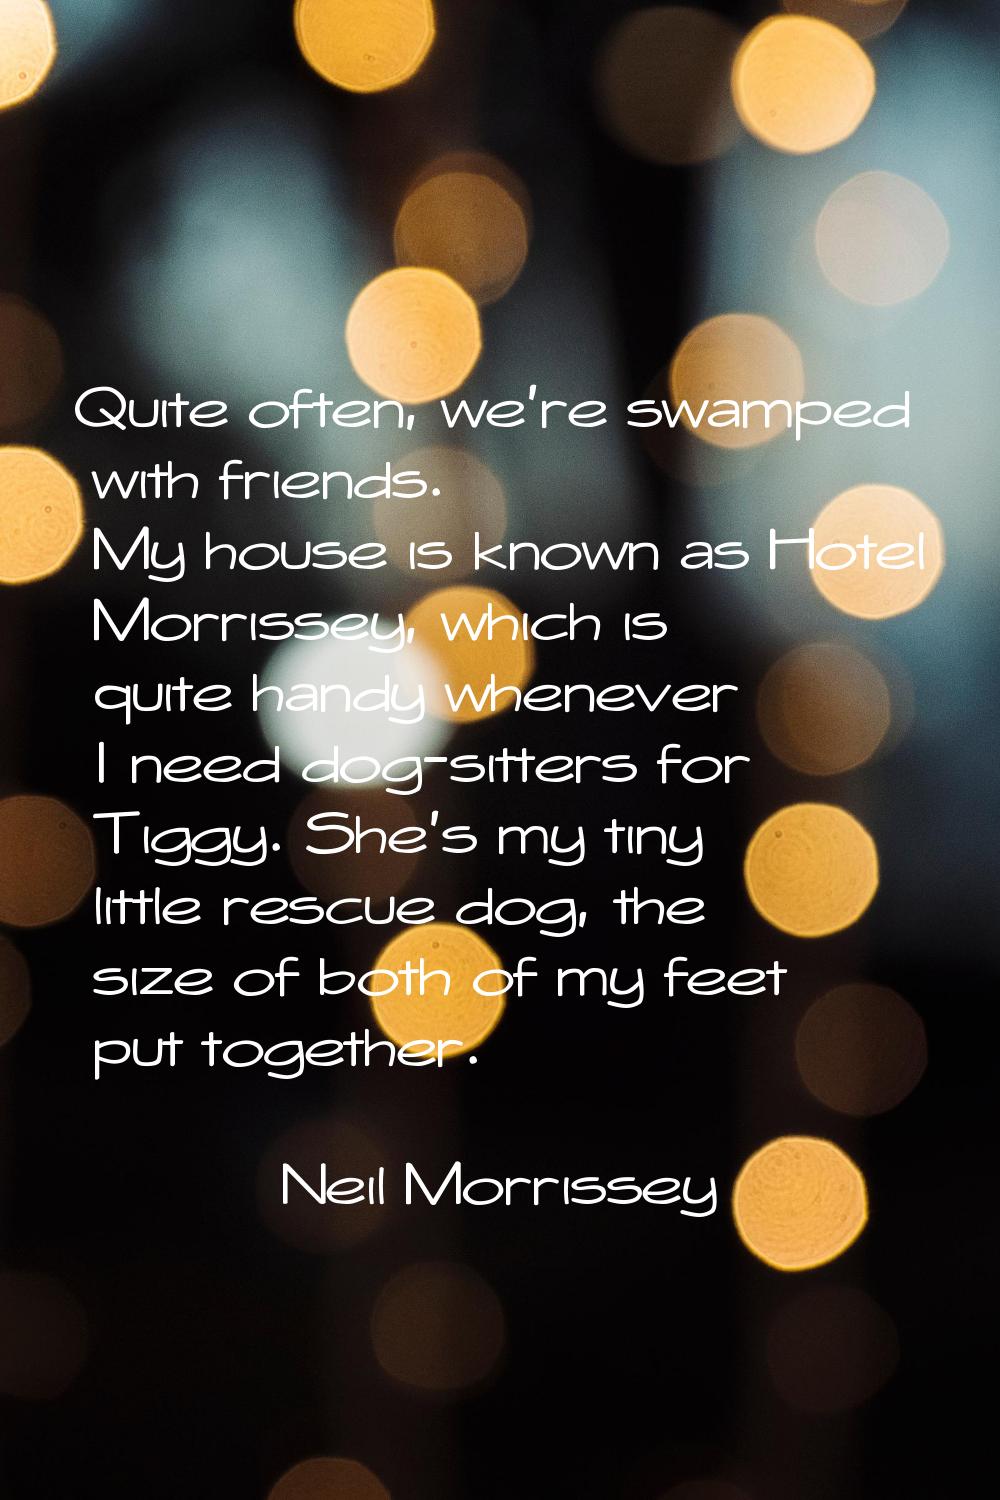 Quite often, we're swamped with friends. My house is known as Hotel Morrissey, which is quite handy